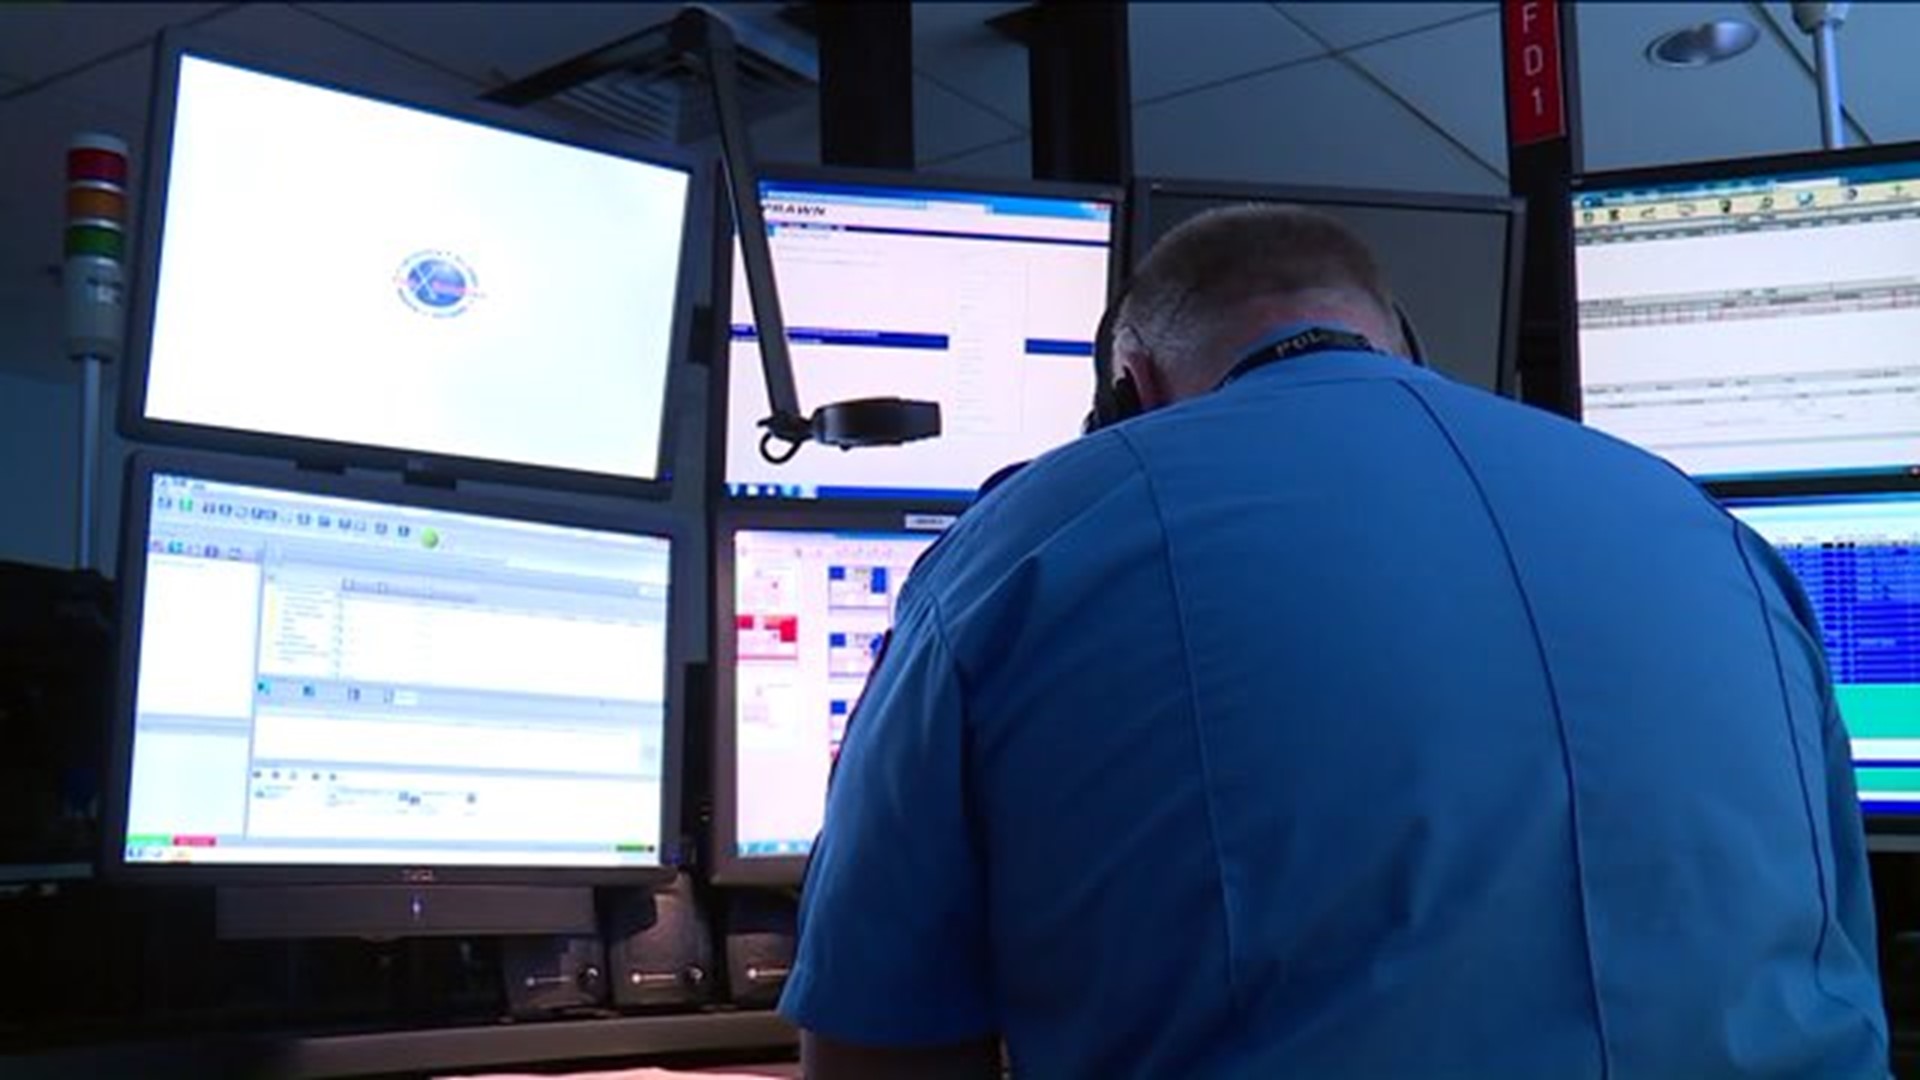 New dispatch center improves safety in the Elm City